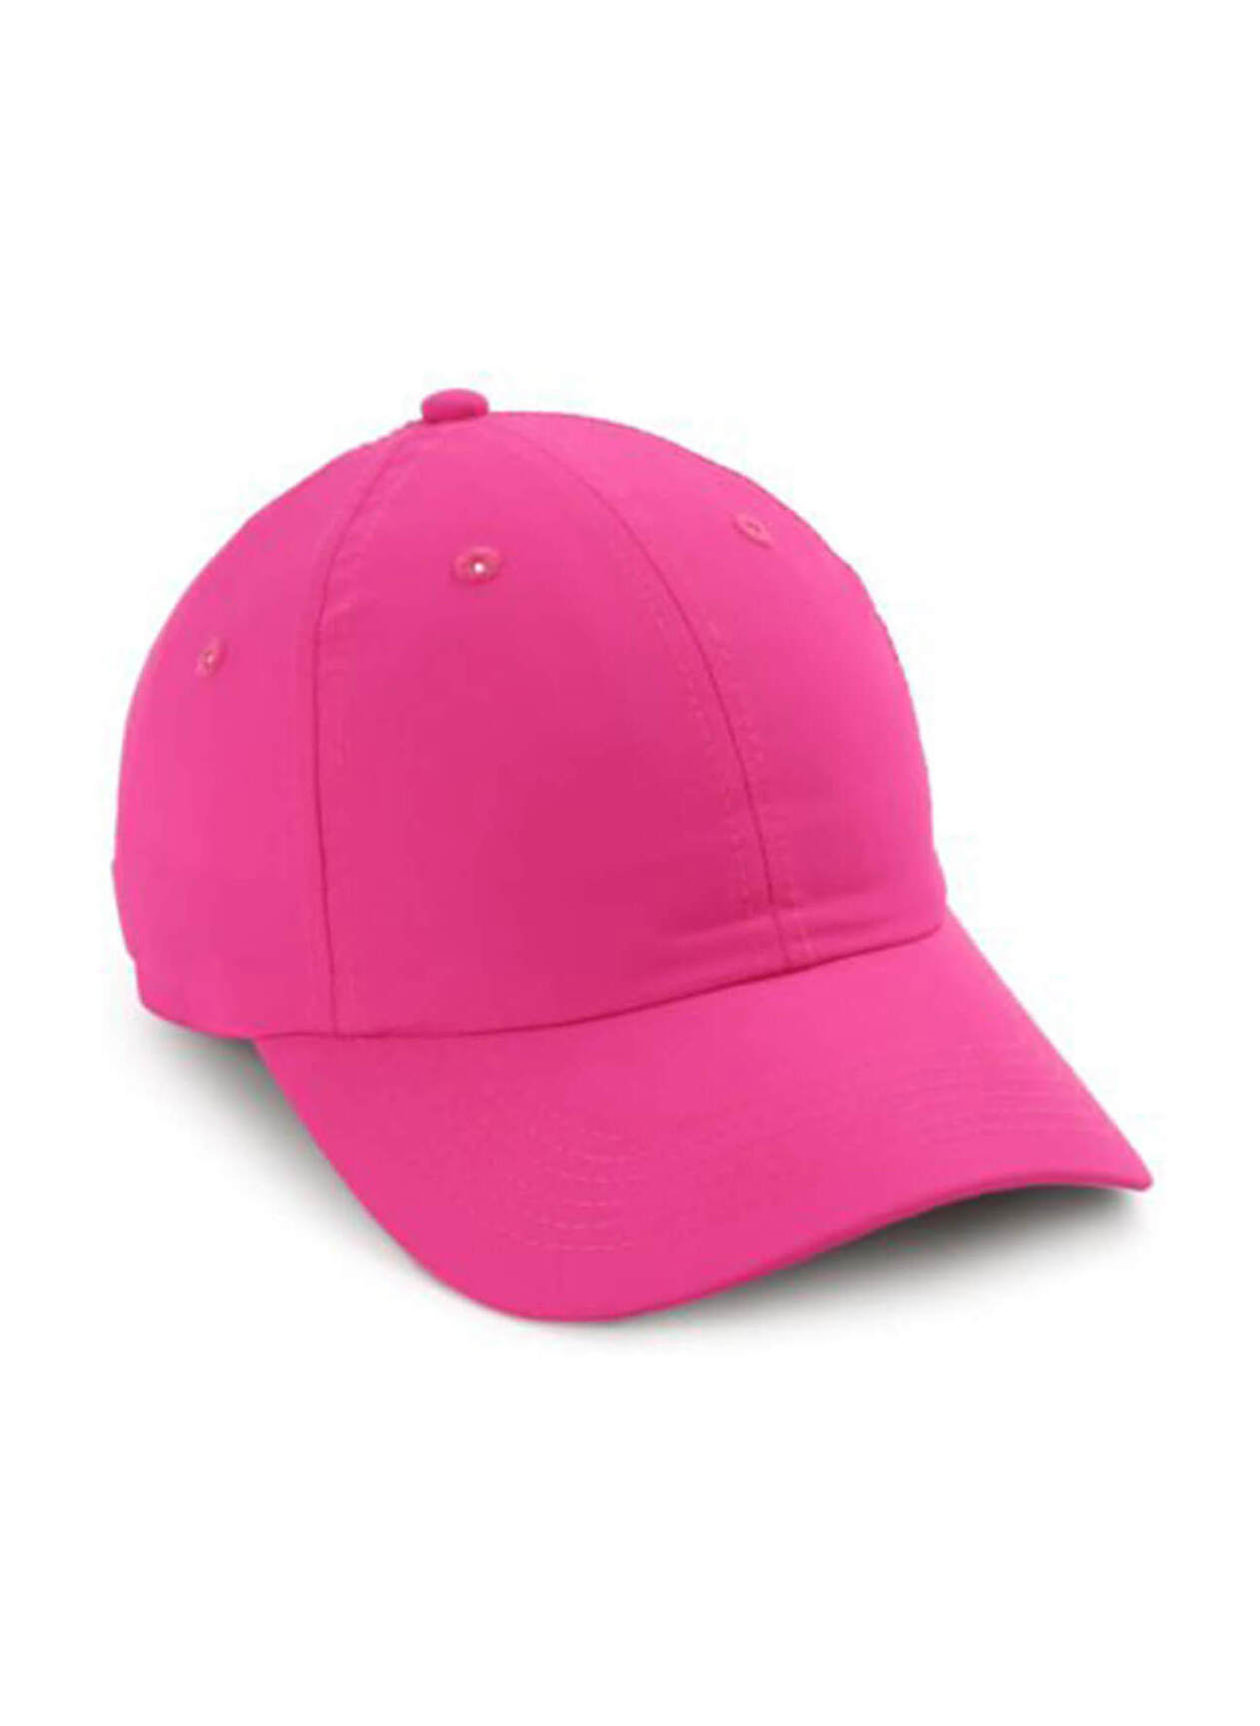 Imperial Hot Pink Original Small Fit Performance Hat